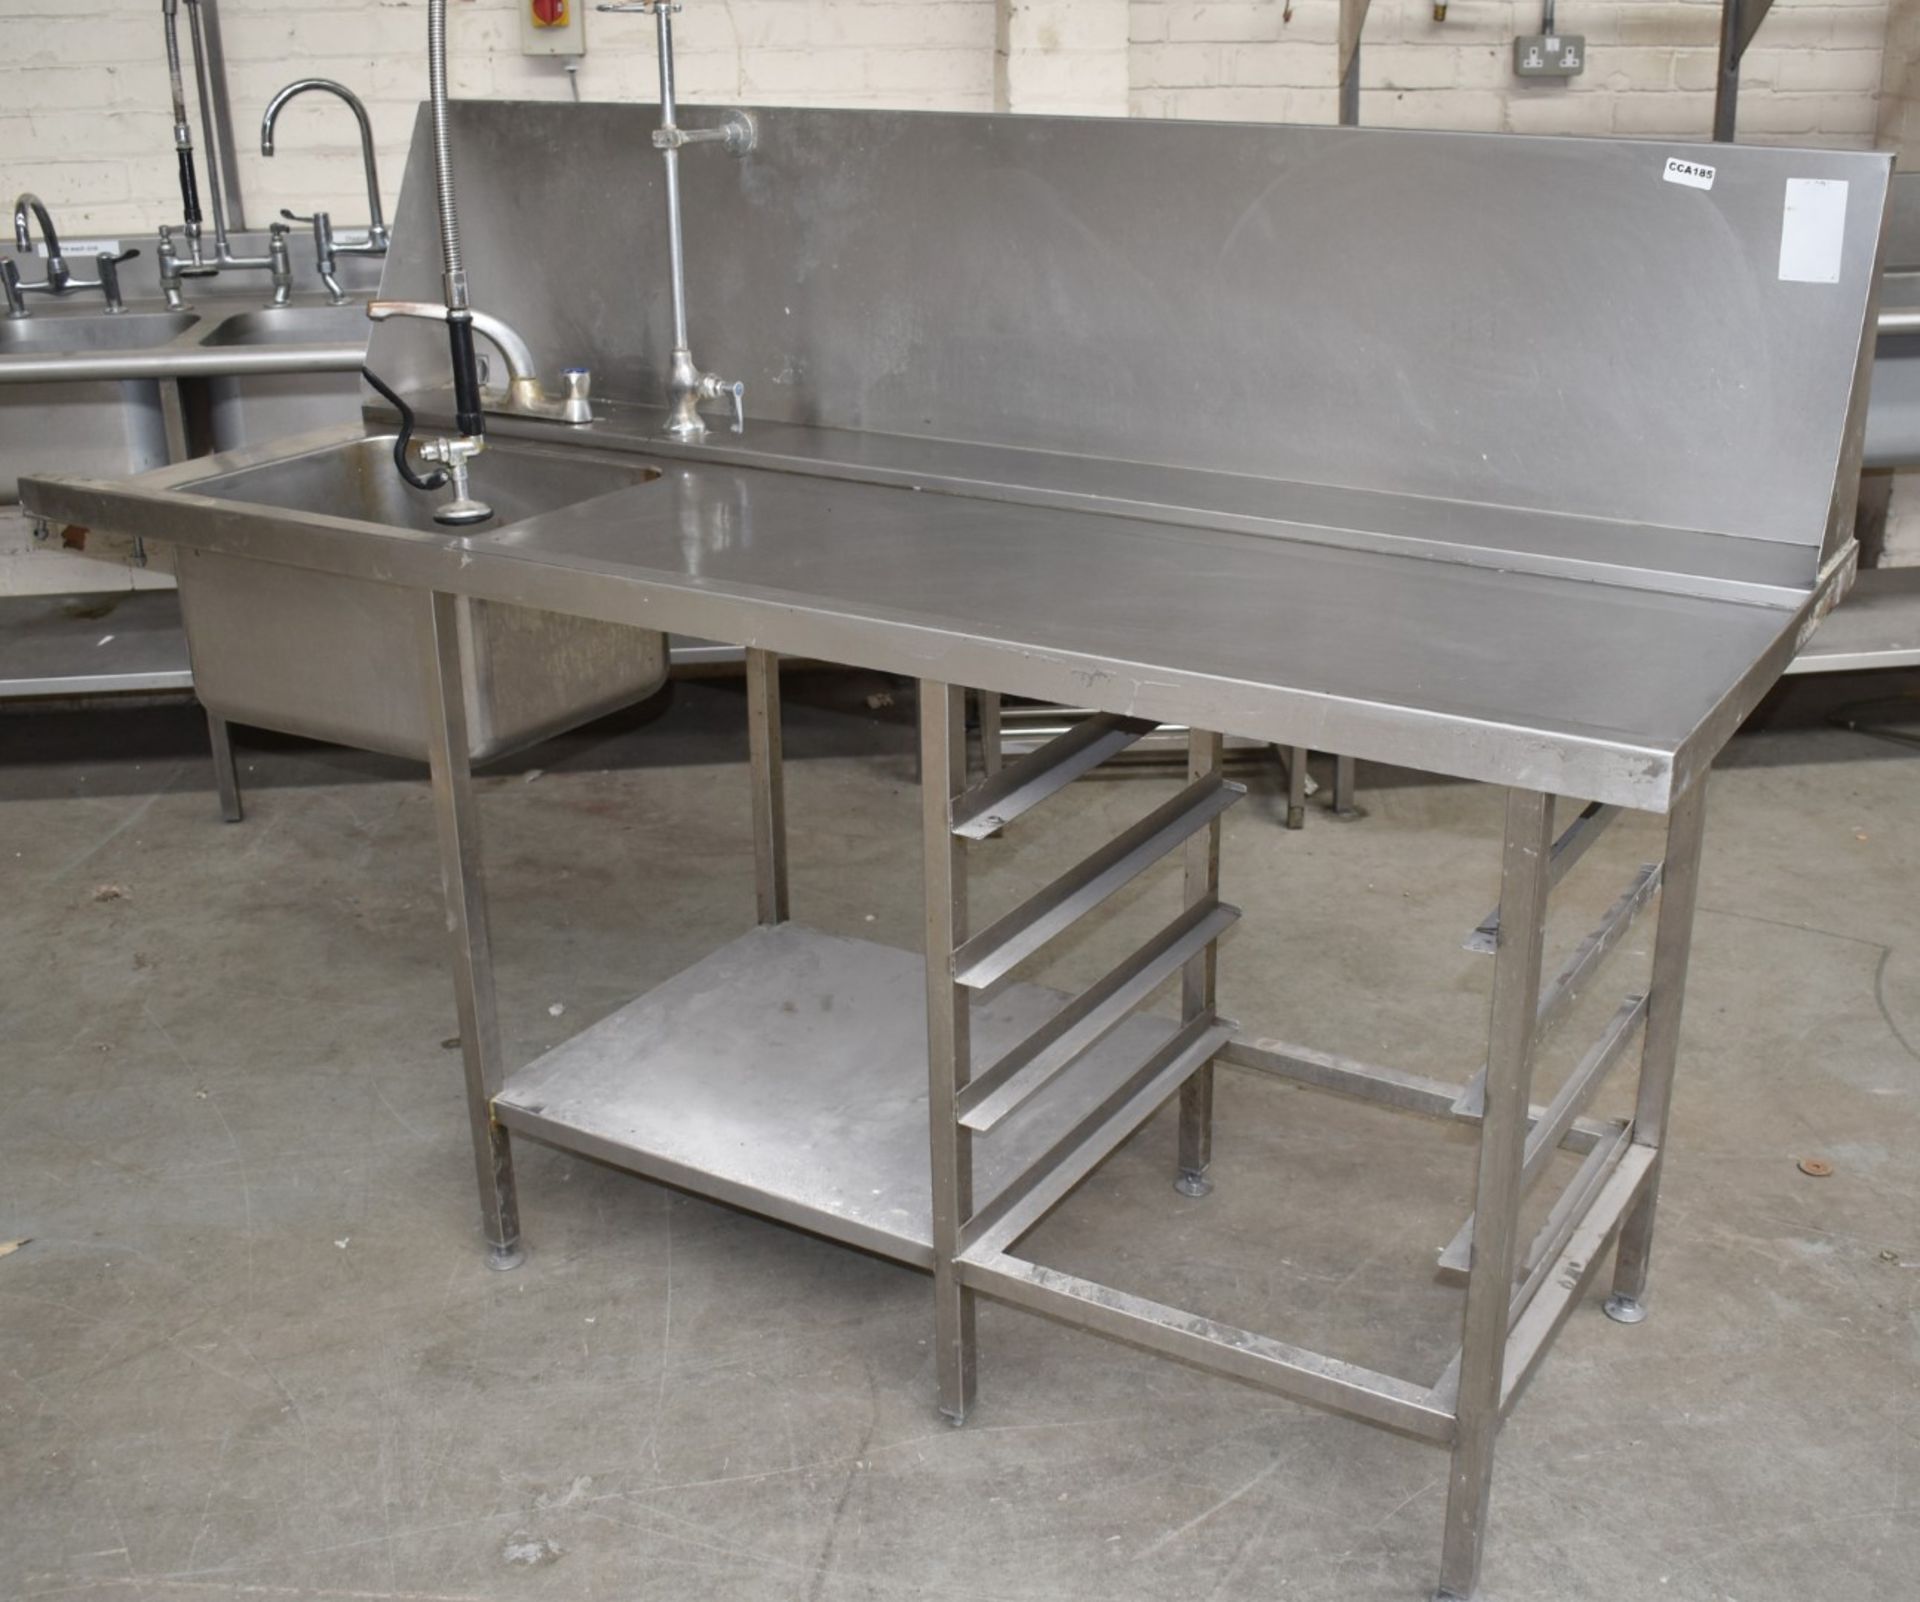 1 x Stainless Steel Passthrough Dishwasher Inlet Table Featuring Wash Basin, Mixer Tap, Hose Spray